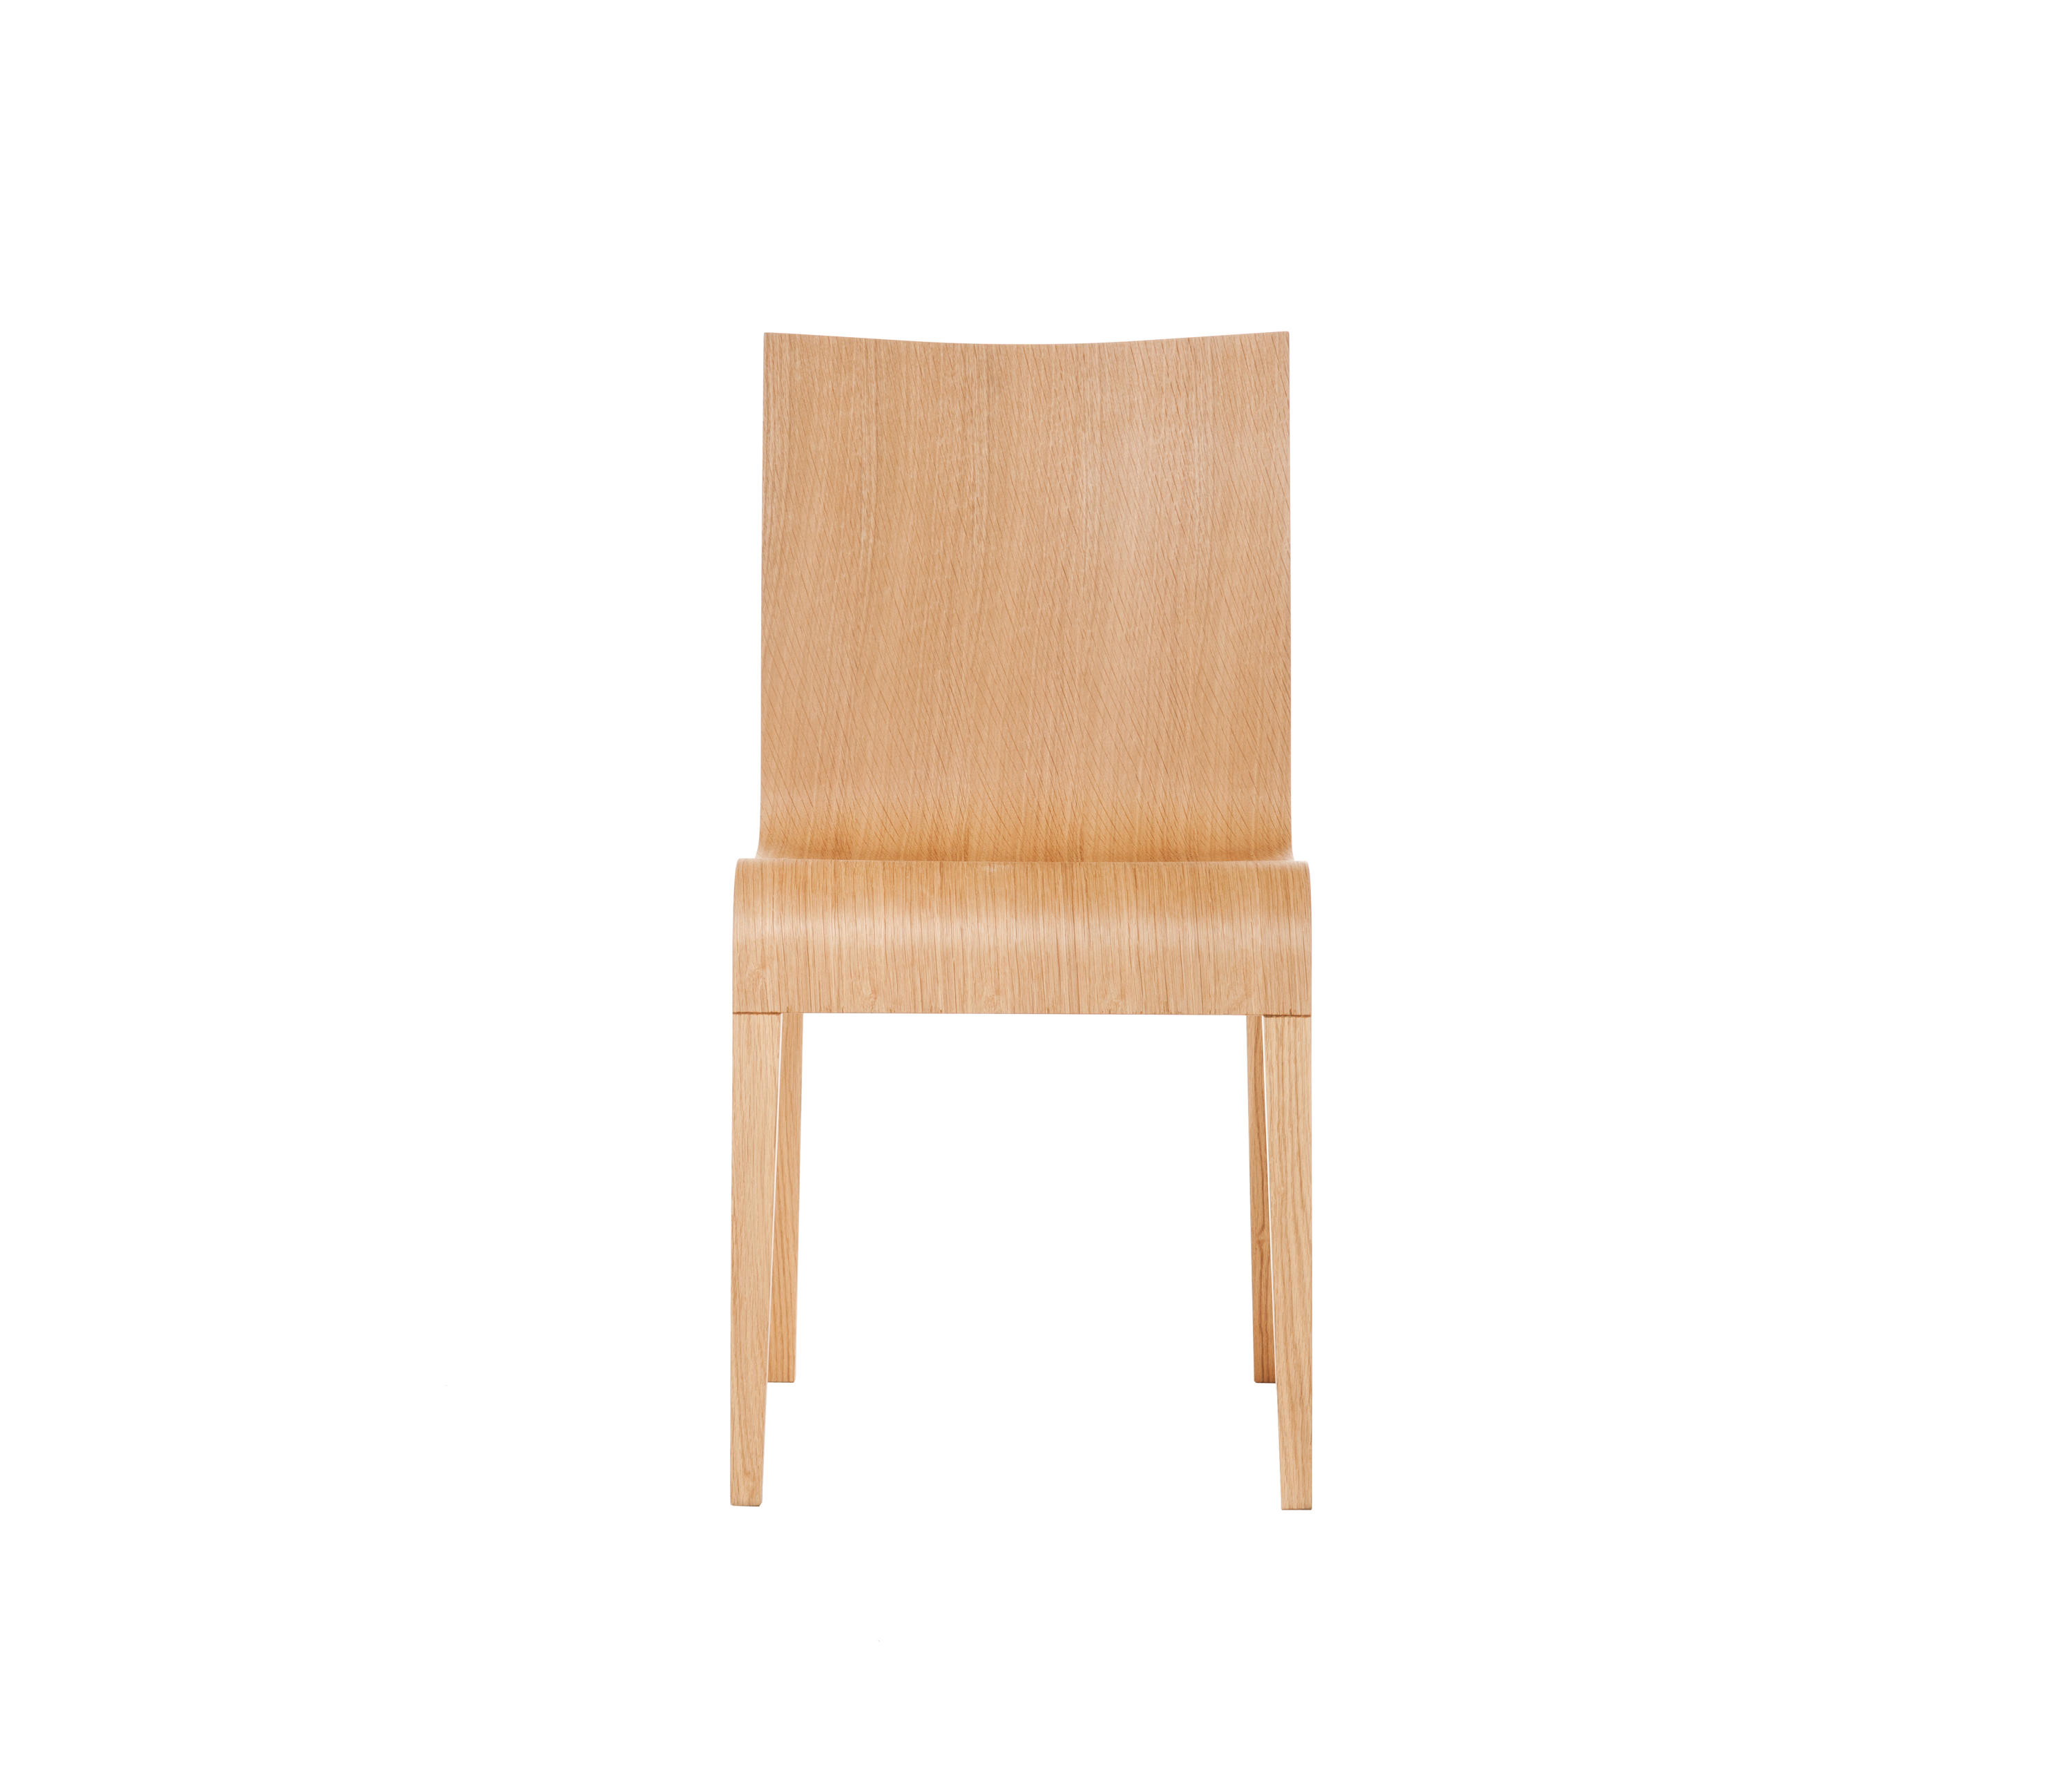 SIMPLE CHAIR - Chairs from TON | Architonic